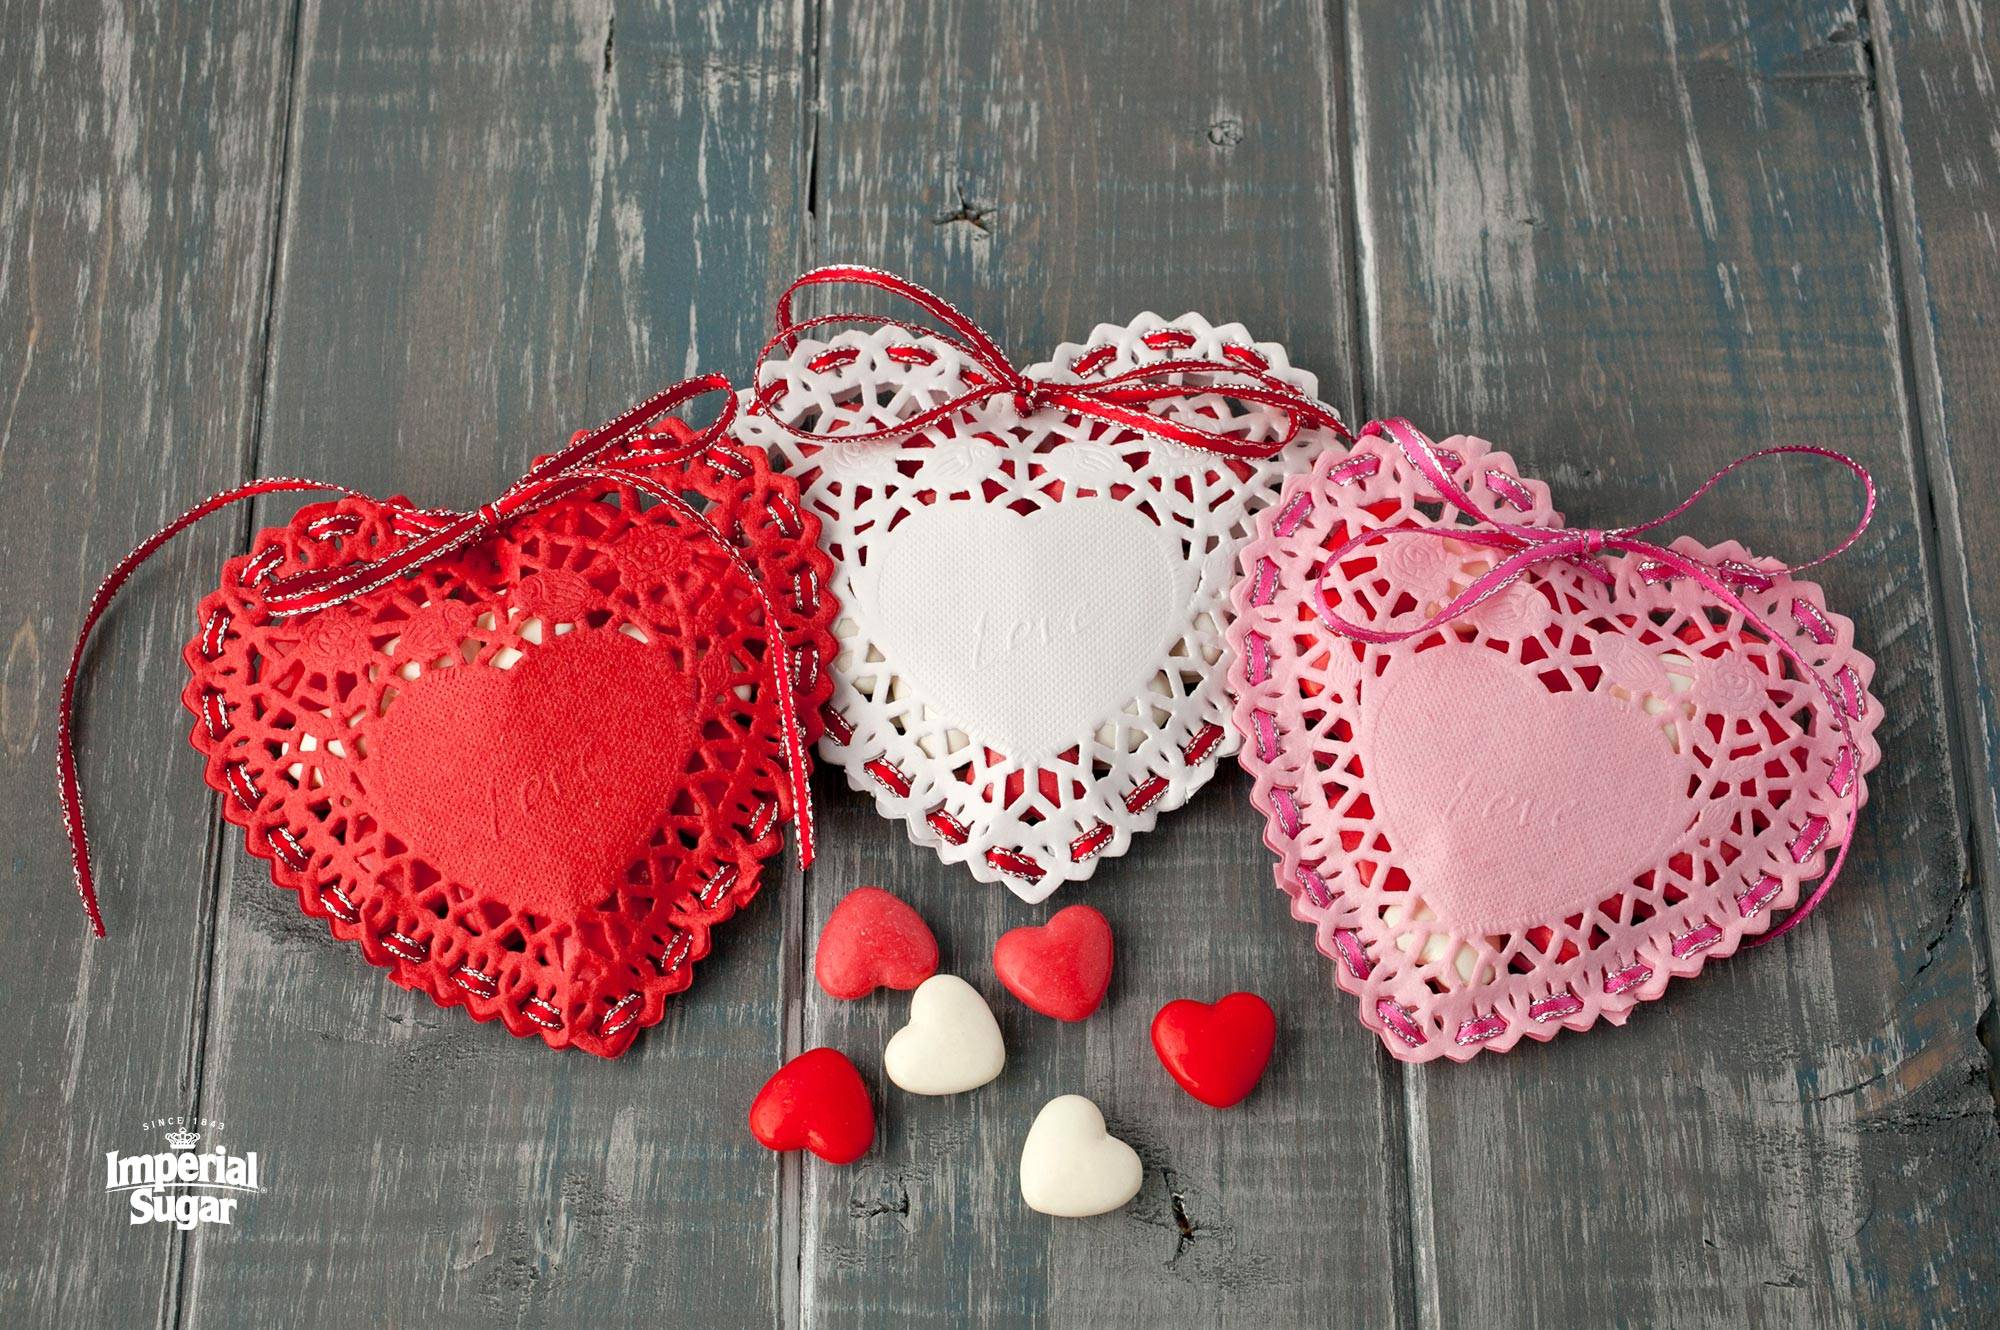 Doily-Candy-Hearts-imperial.jpg